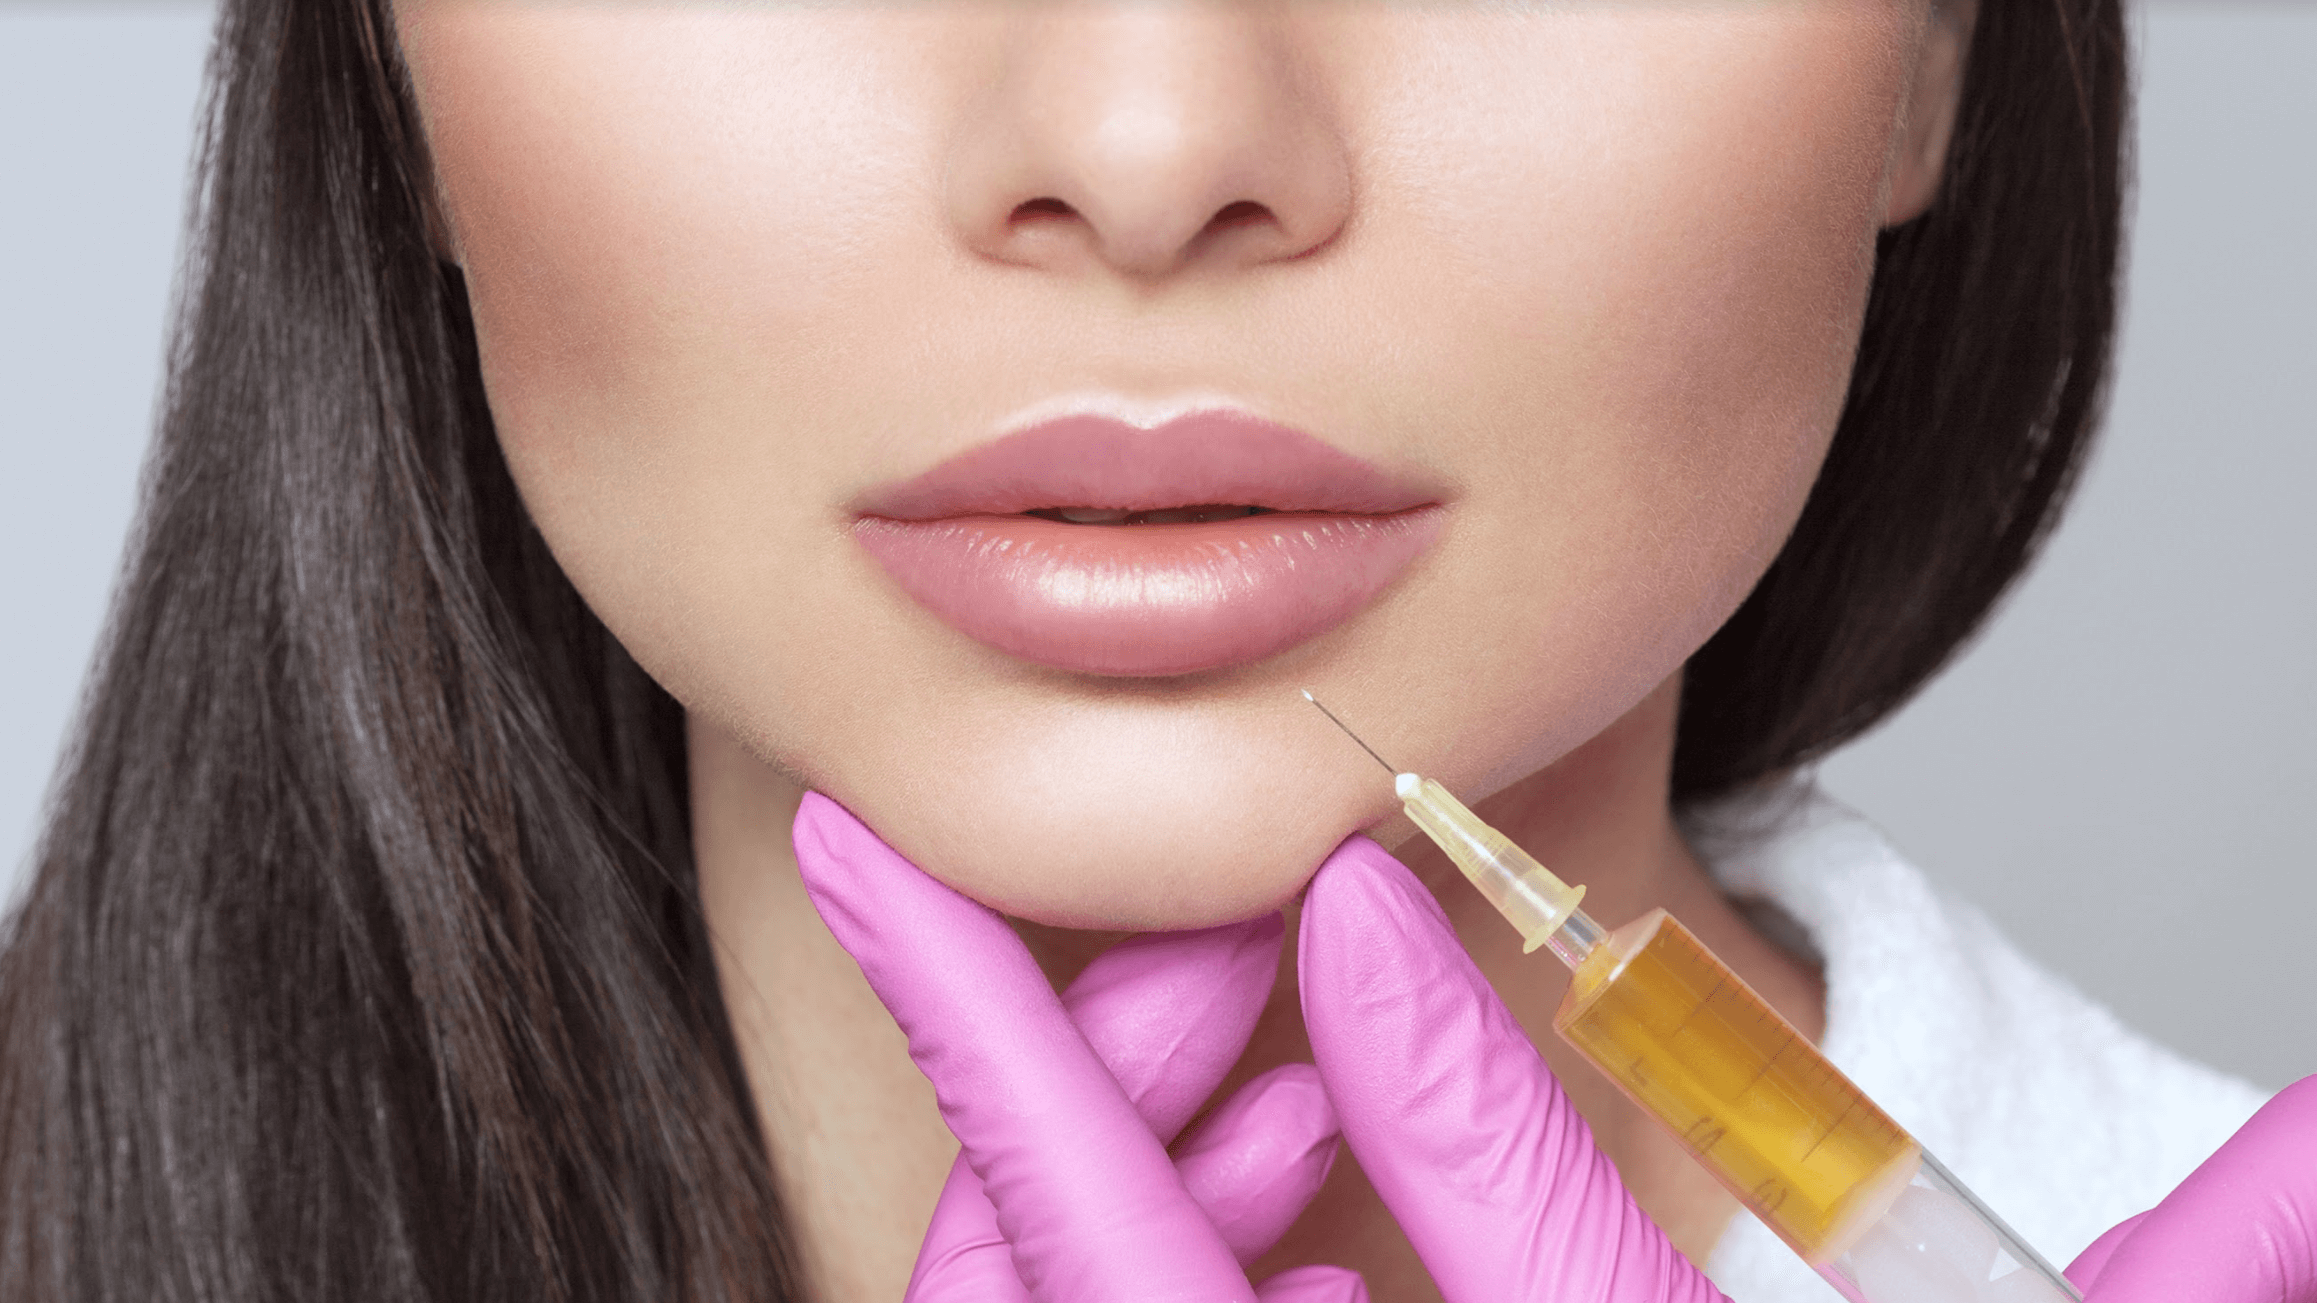 Which JUVÉDERM® Treatment Can Add Volume to My Naturally Thin Lips?